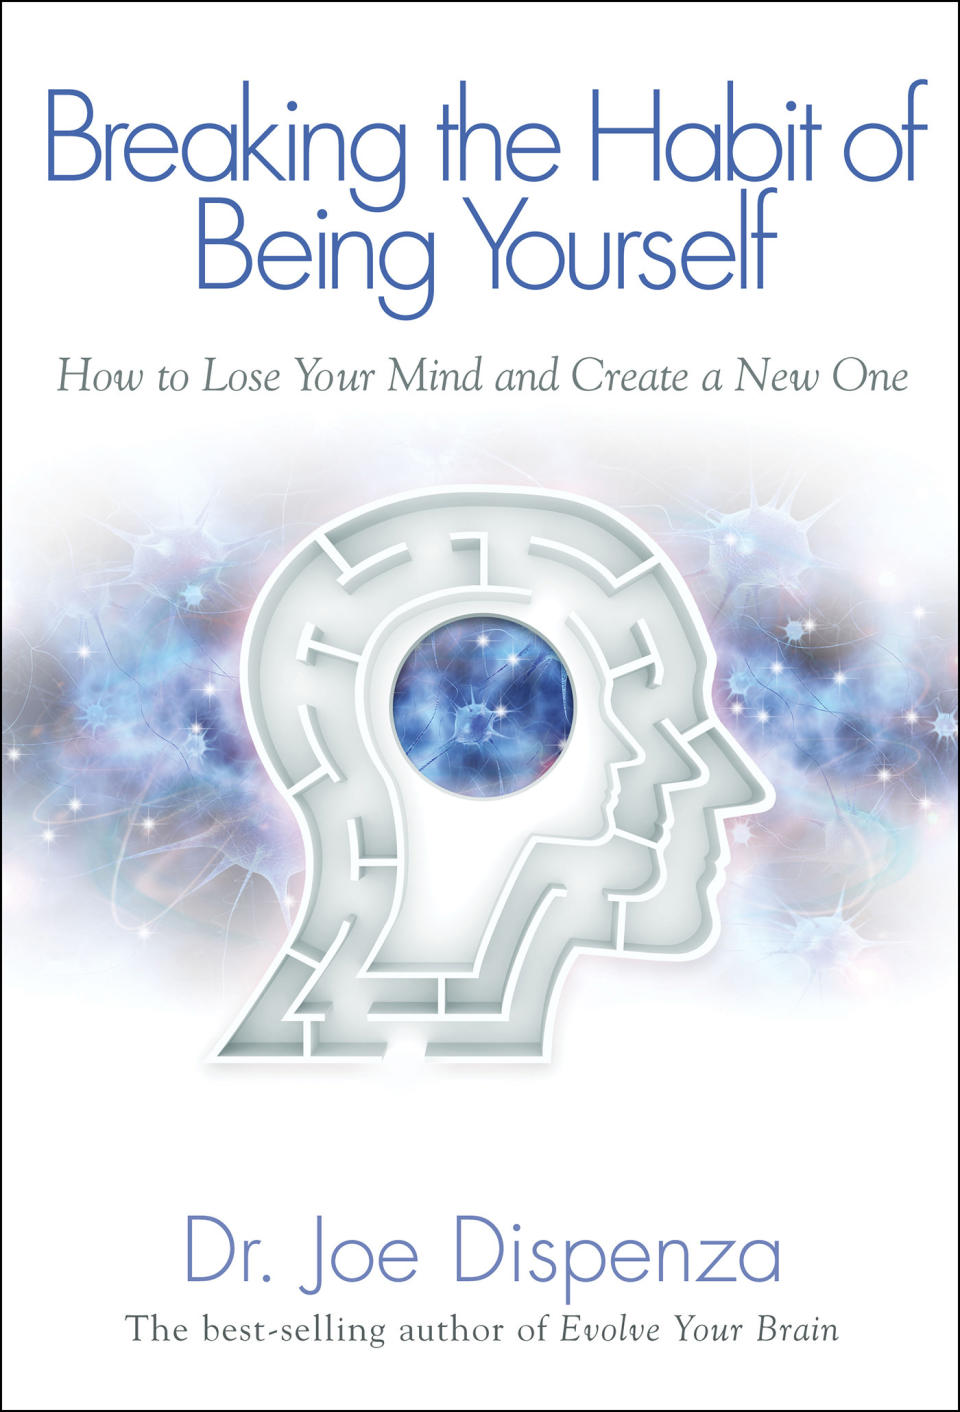 Our reactions and approaches to events form different habits no matter how uncomfortable we are. Breaking the Habit of Being Yourself, written by Dr. Joe Dispenza, brings together different fields like quantum physics, neuroscience, brain chemistry, biology, and genetics to help you break certain patterns and show what you are capable of.